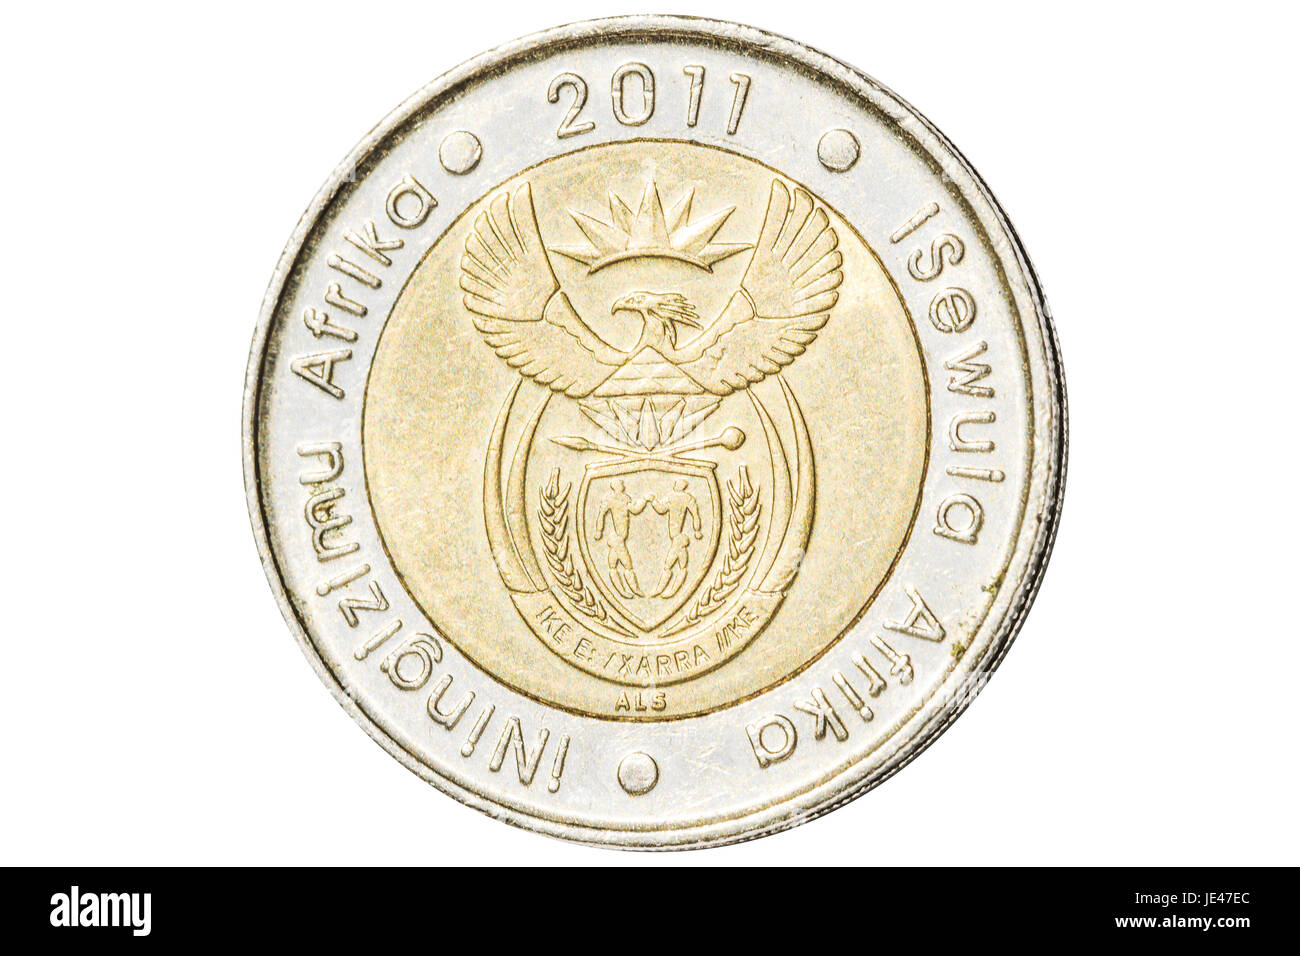 South African five rand coin Stock Photo